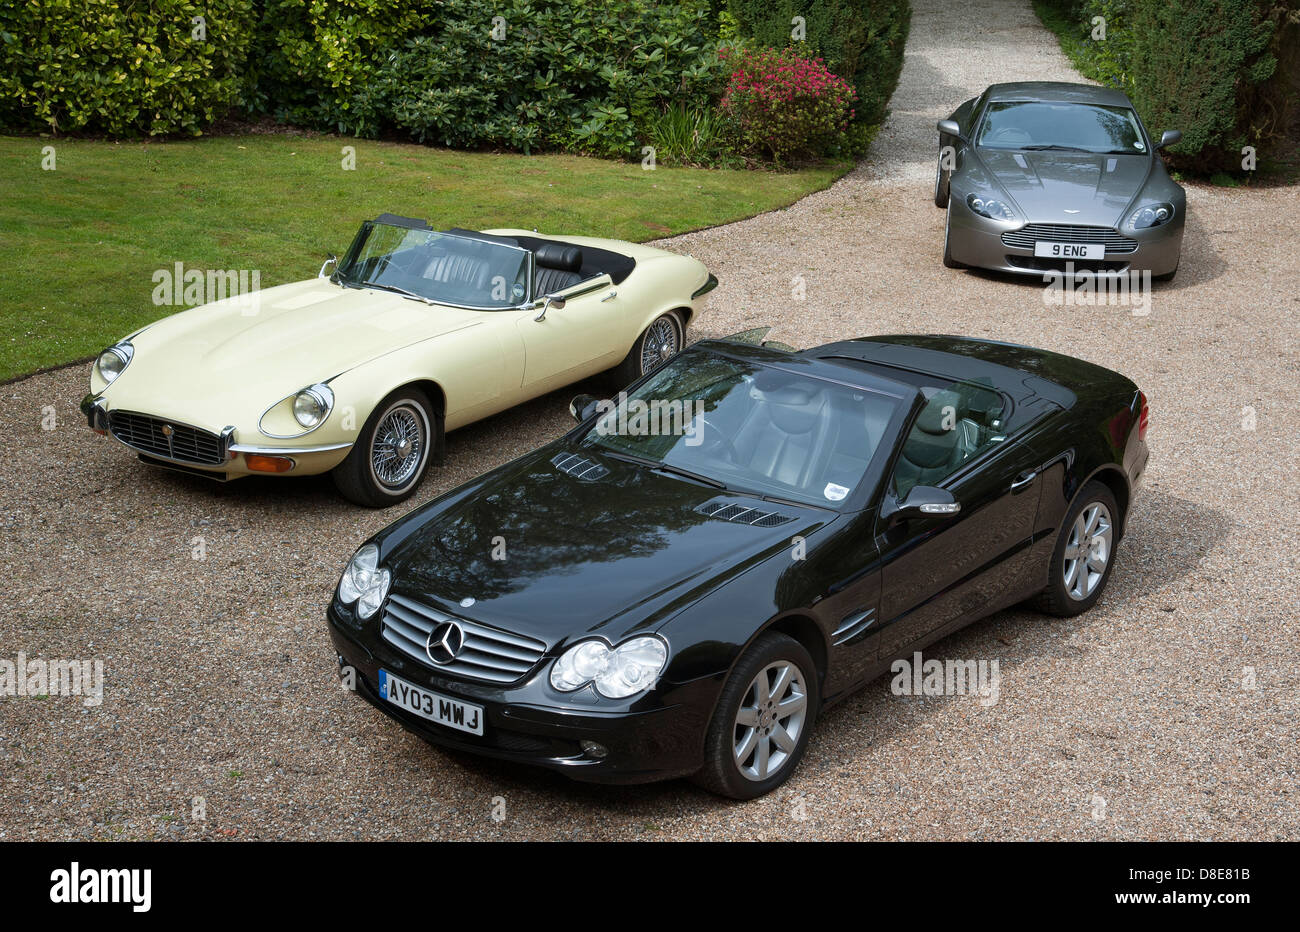 Expensive luxury cars on a driveway Stock Photo